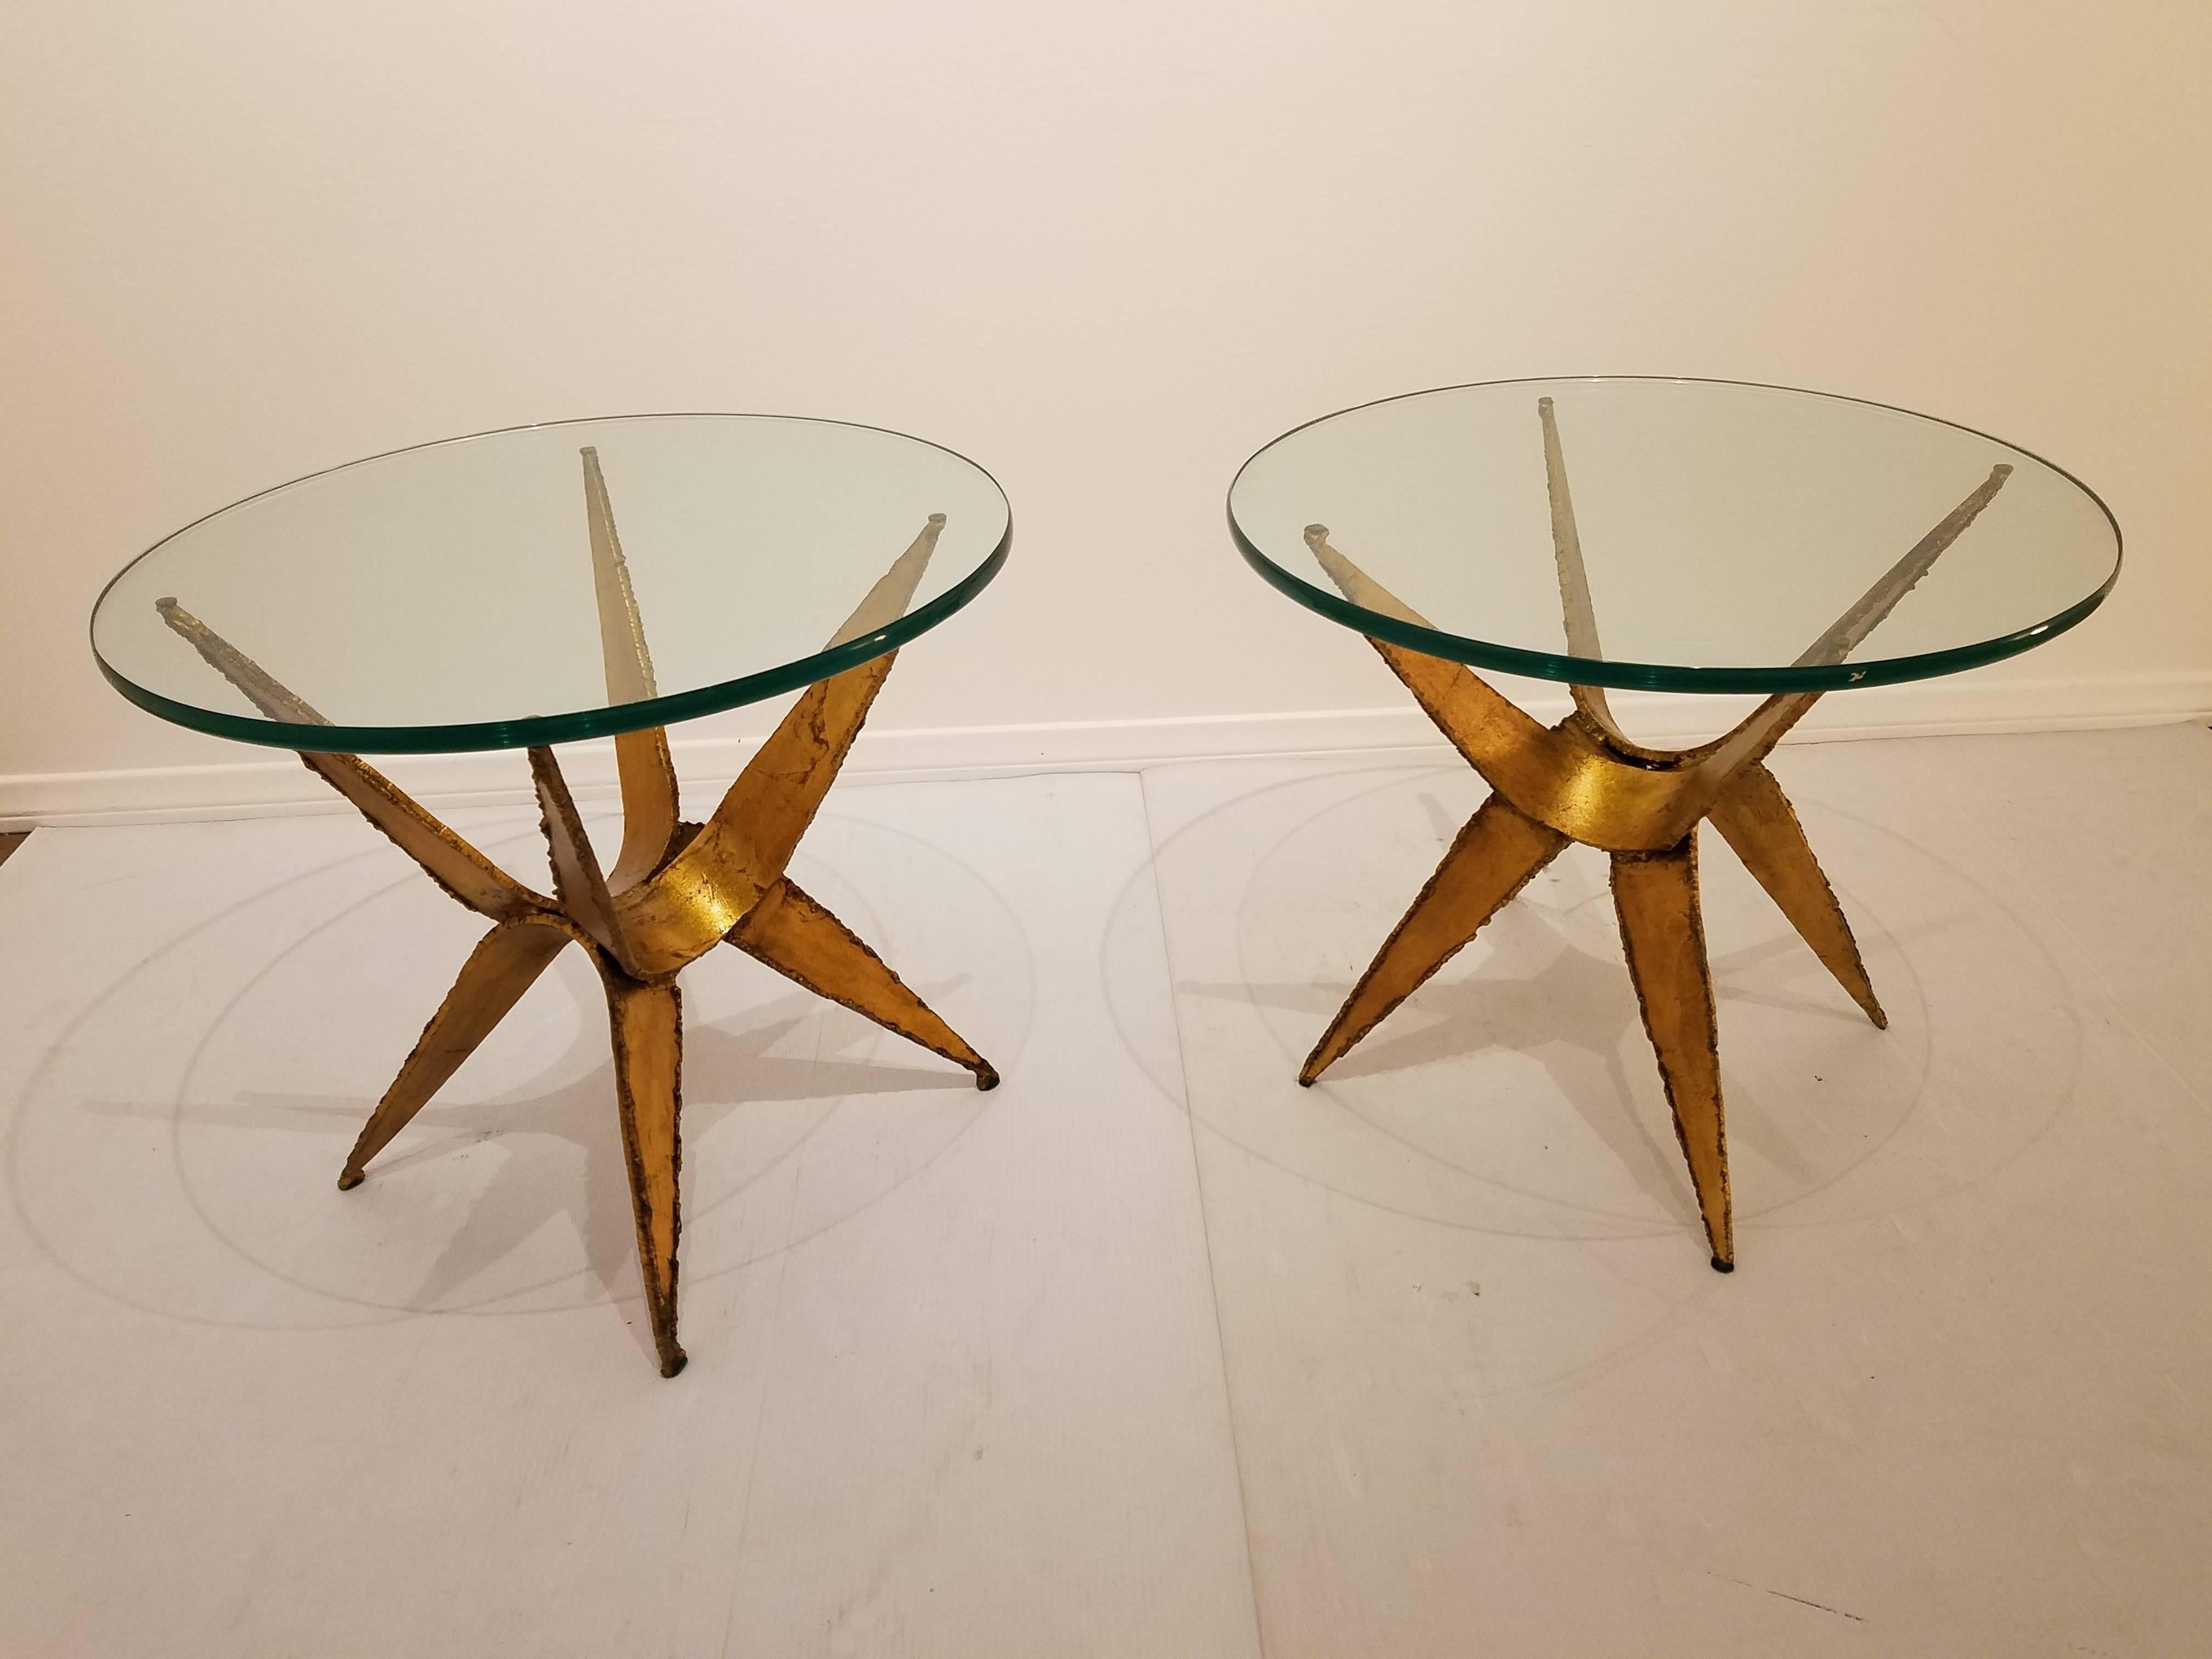 Pair of Brutal Cocktail Tables Torch Cut Steel in Gold Leaf Finish 1